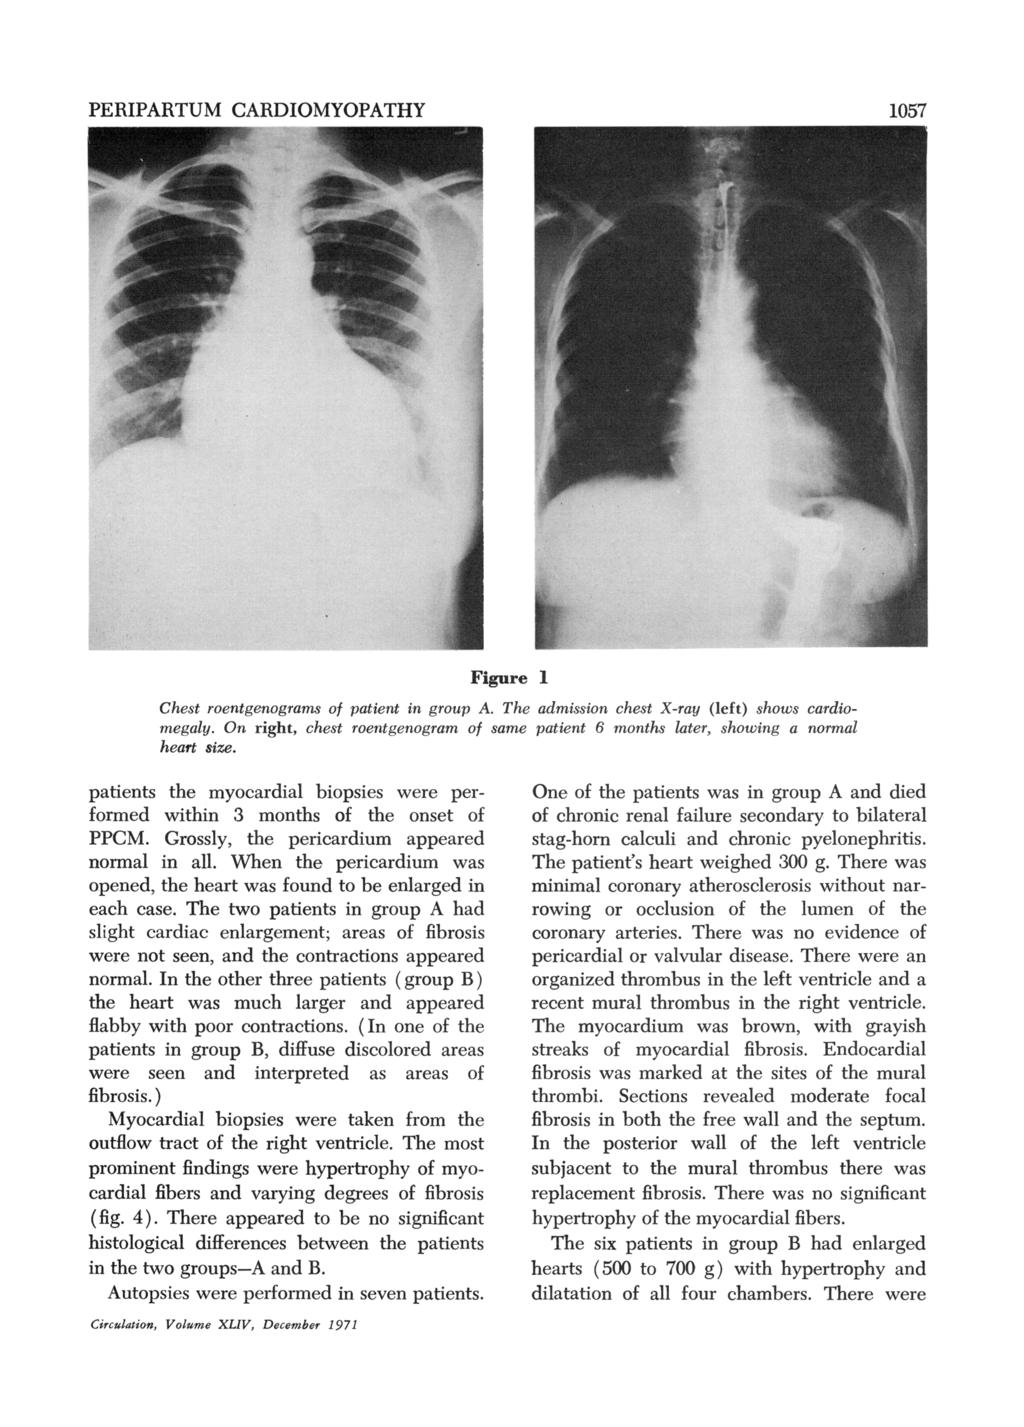 PERIPARTUM CARDIOMYOPATHY 57 Figure Chest roentgenograns of patient in group A. The admission chest X-ray (left) shows cardiomegaly.